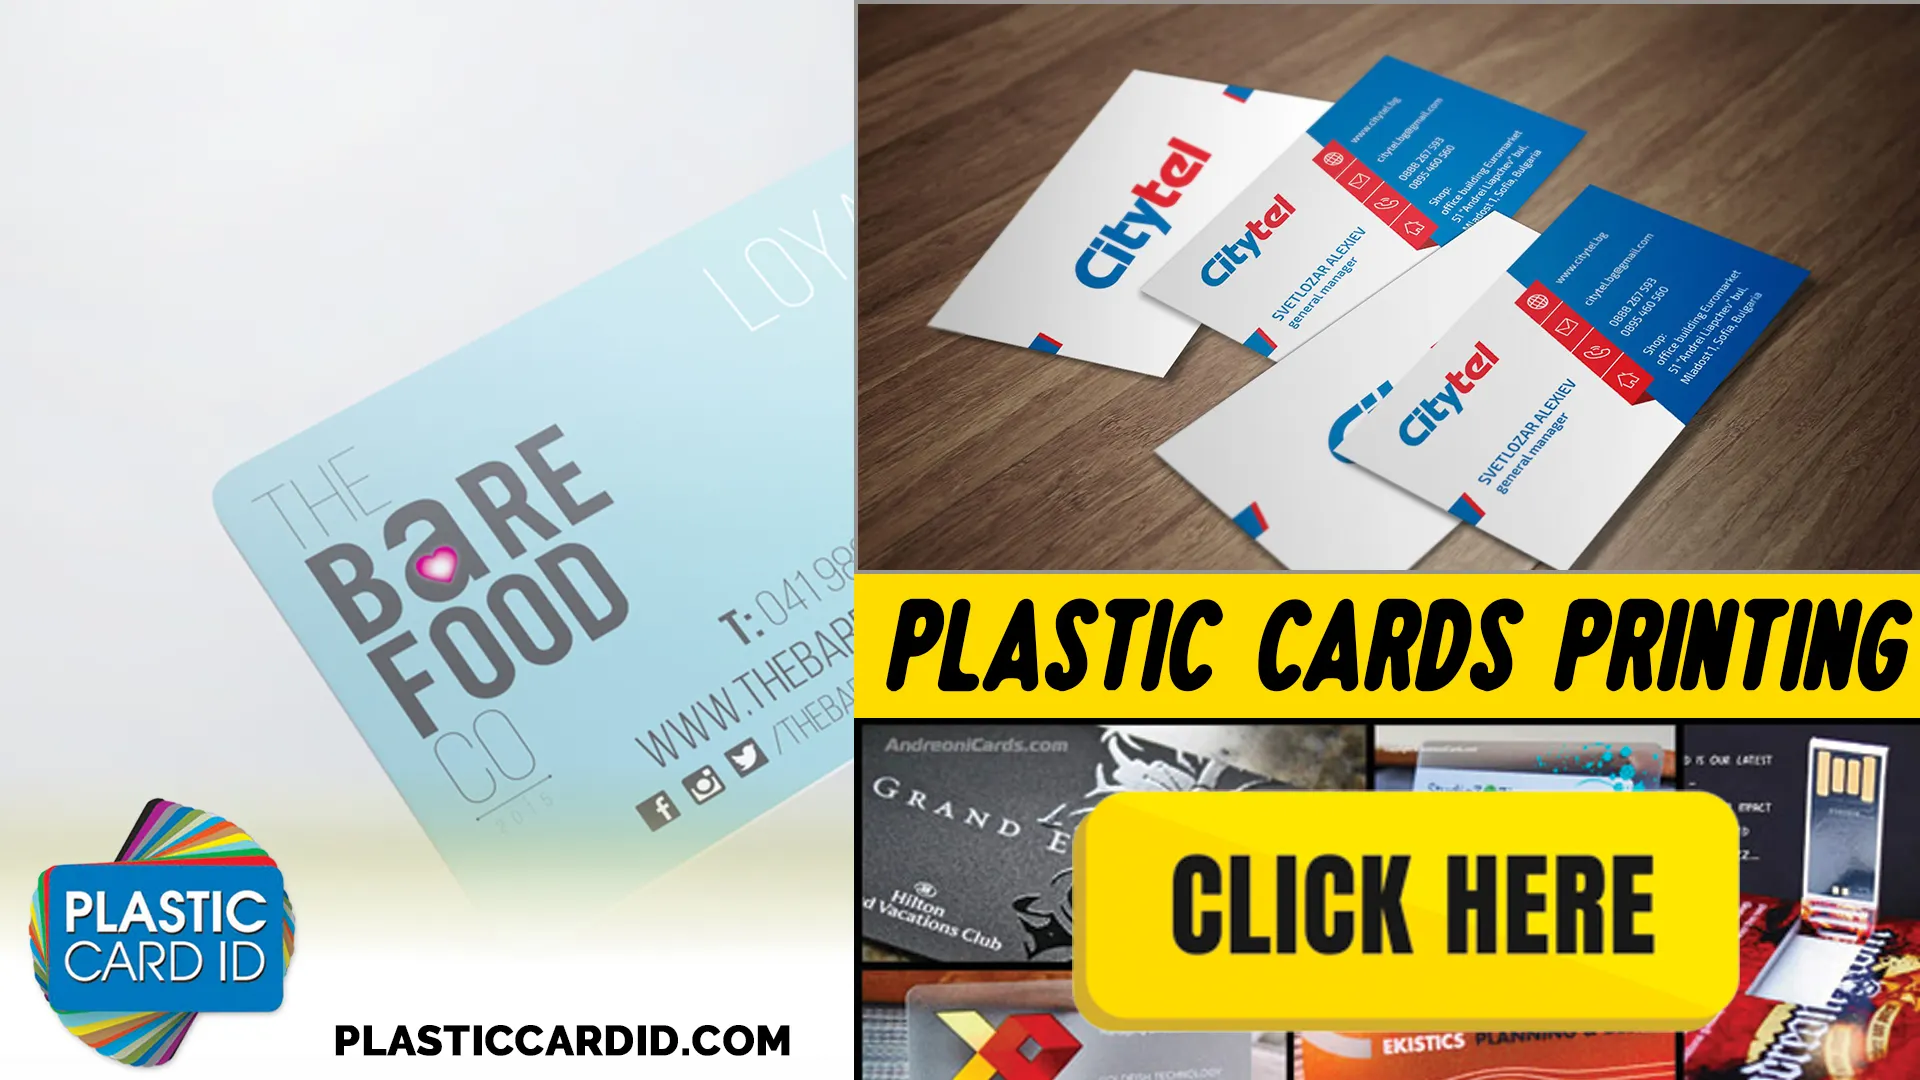 The Pillars of Integrated Marketing with Plastic Card ID
